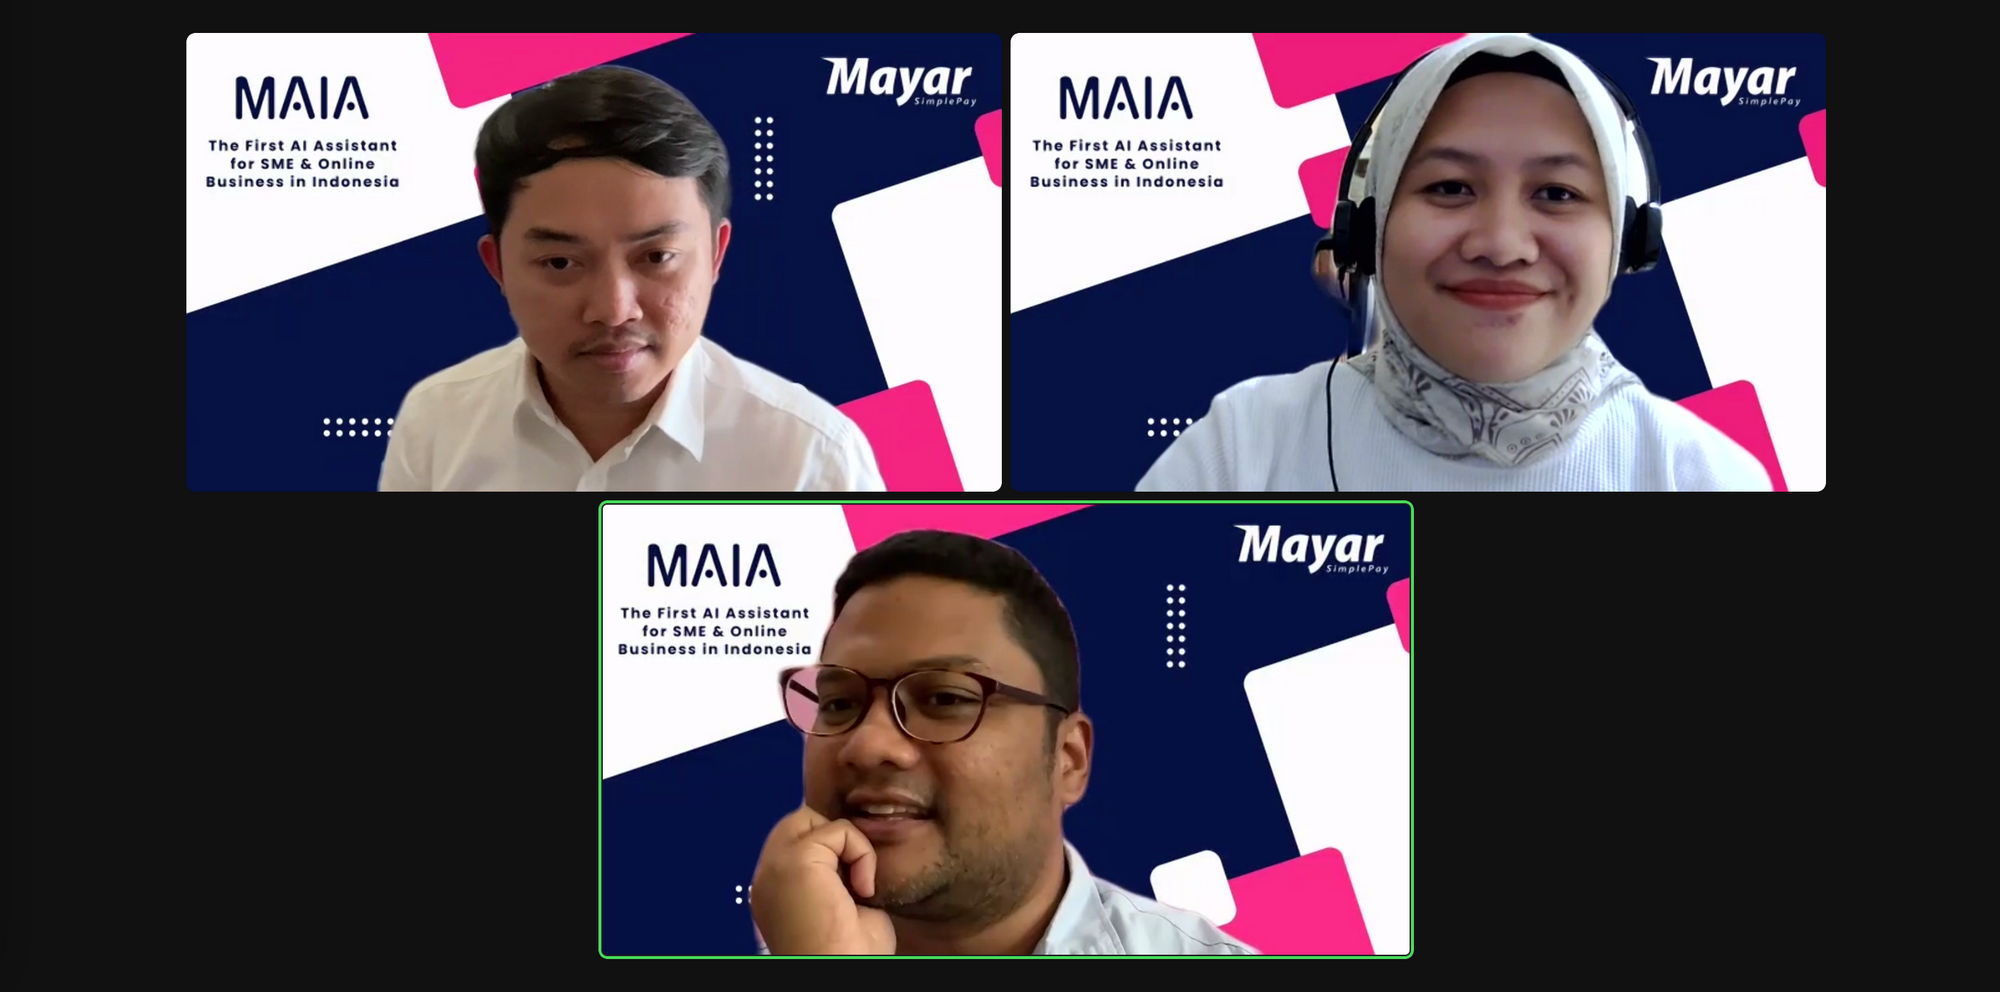 Mayar.id Launches MAIA, The First Artificial Intelligence (AI) Assistant for MSMEs & Online Business in Indonesia